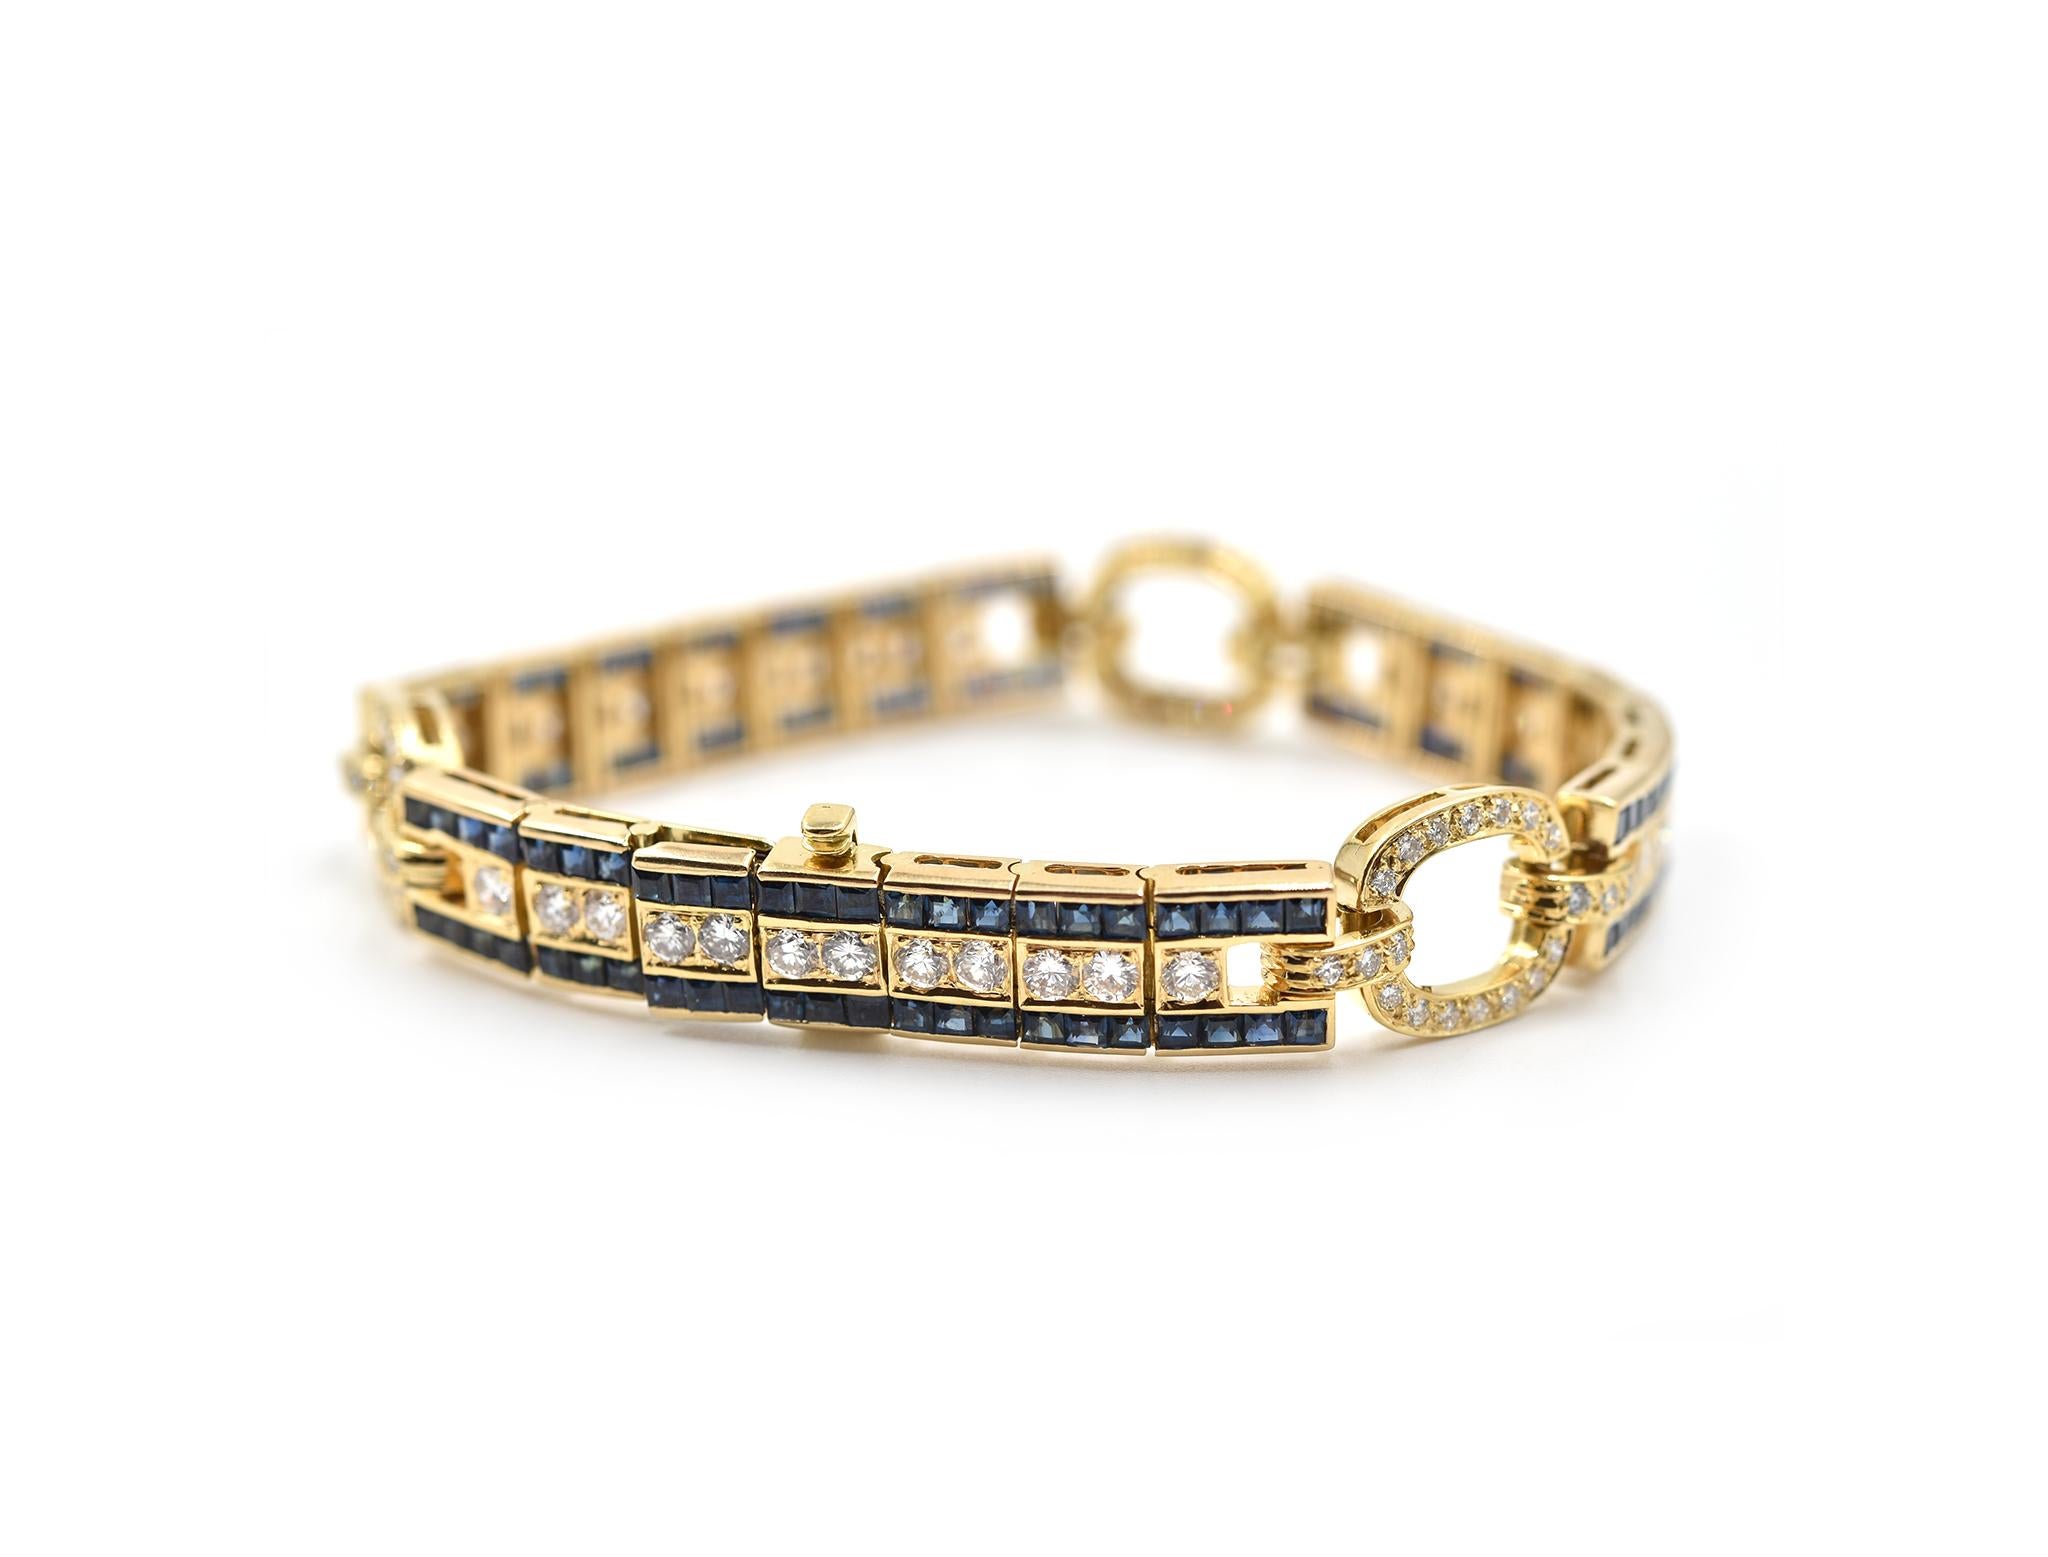 Designer: custom design
Material: 18k yellow gold
Diamonds: 93 round brilliant cut diamonds = 9.60 carat total weight
Dimensions: the bracelet is 7 1/4-inch long and 1/2-inch wide
Weight: 32.43 grams
